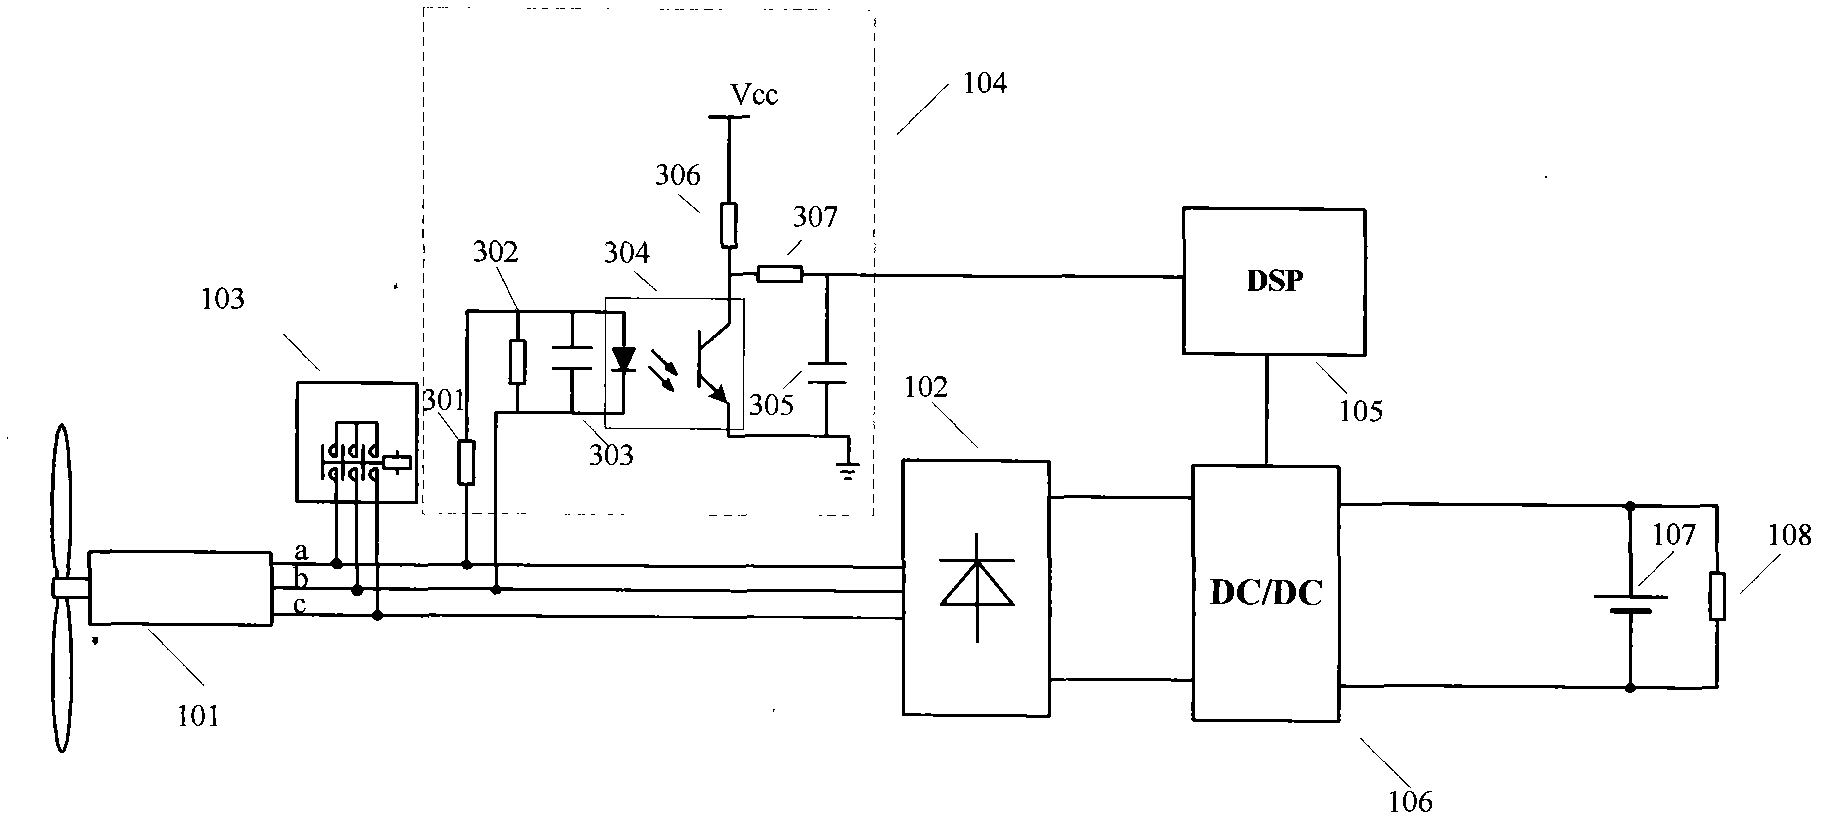 Small wind power generation power controller